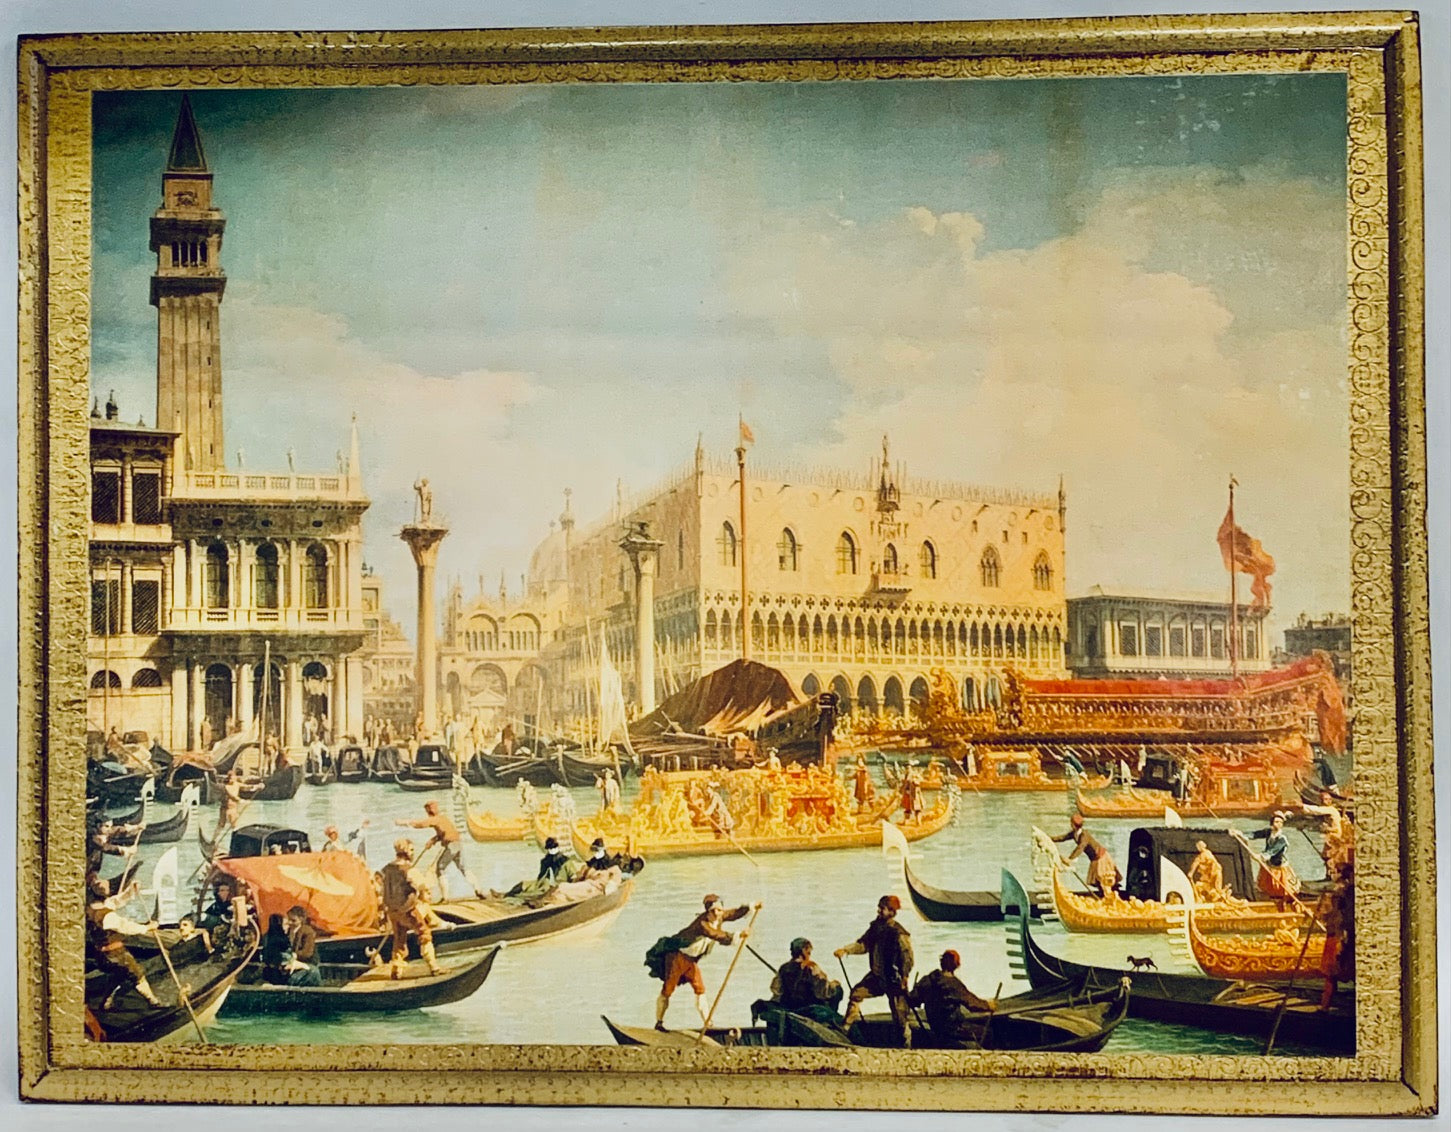 Venice Wall Art, 15" X 20", Made in Italy on Florentine wood from Florence - Royal Gift